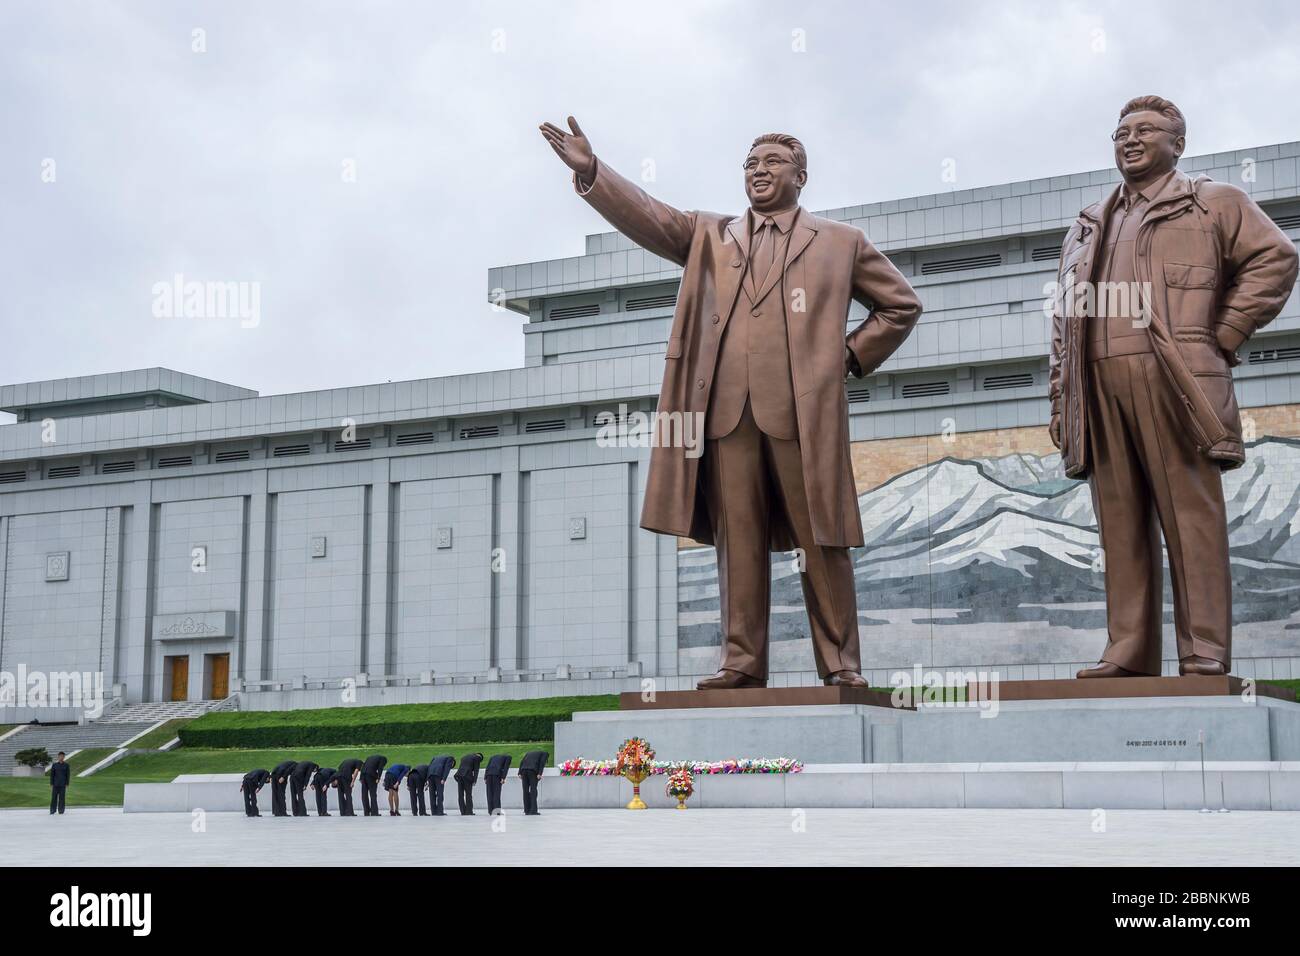 North Korean people bowing in front of Kim Il Sung and Kim Jong Il statues in Mansudae Grand Monument, Pyongyang, North Korea Stock Photo